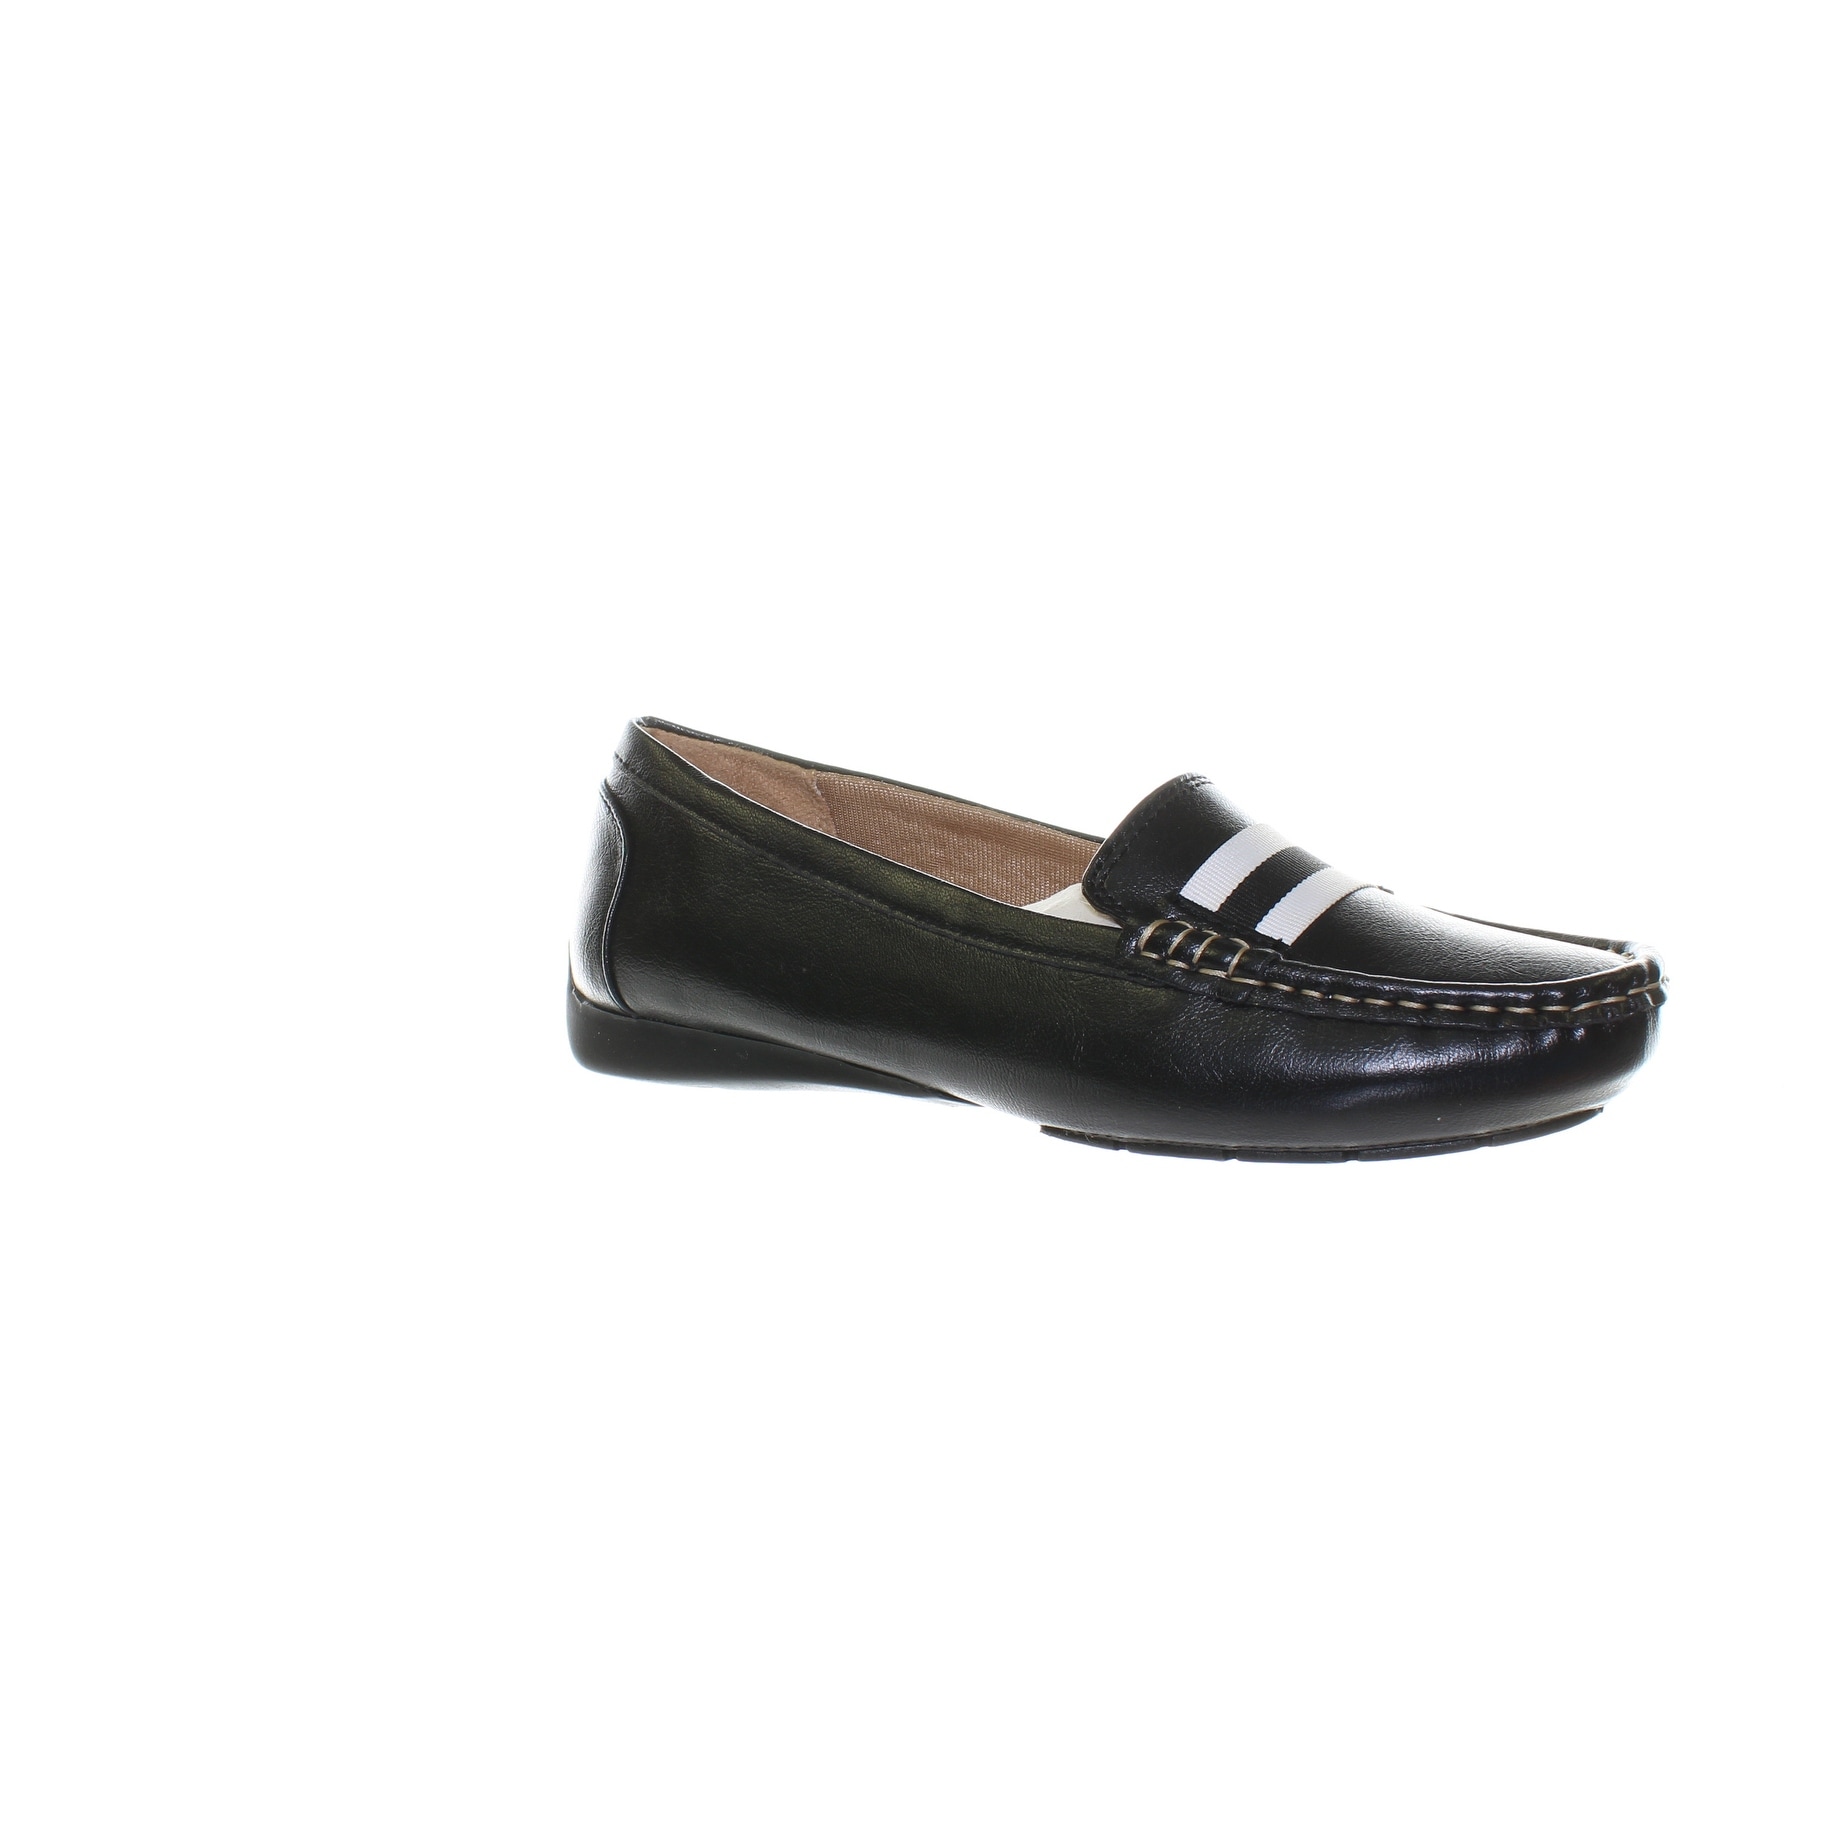 ladies black leather loafers size 6